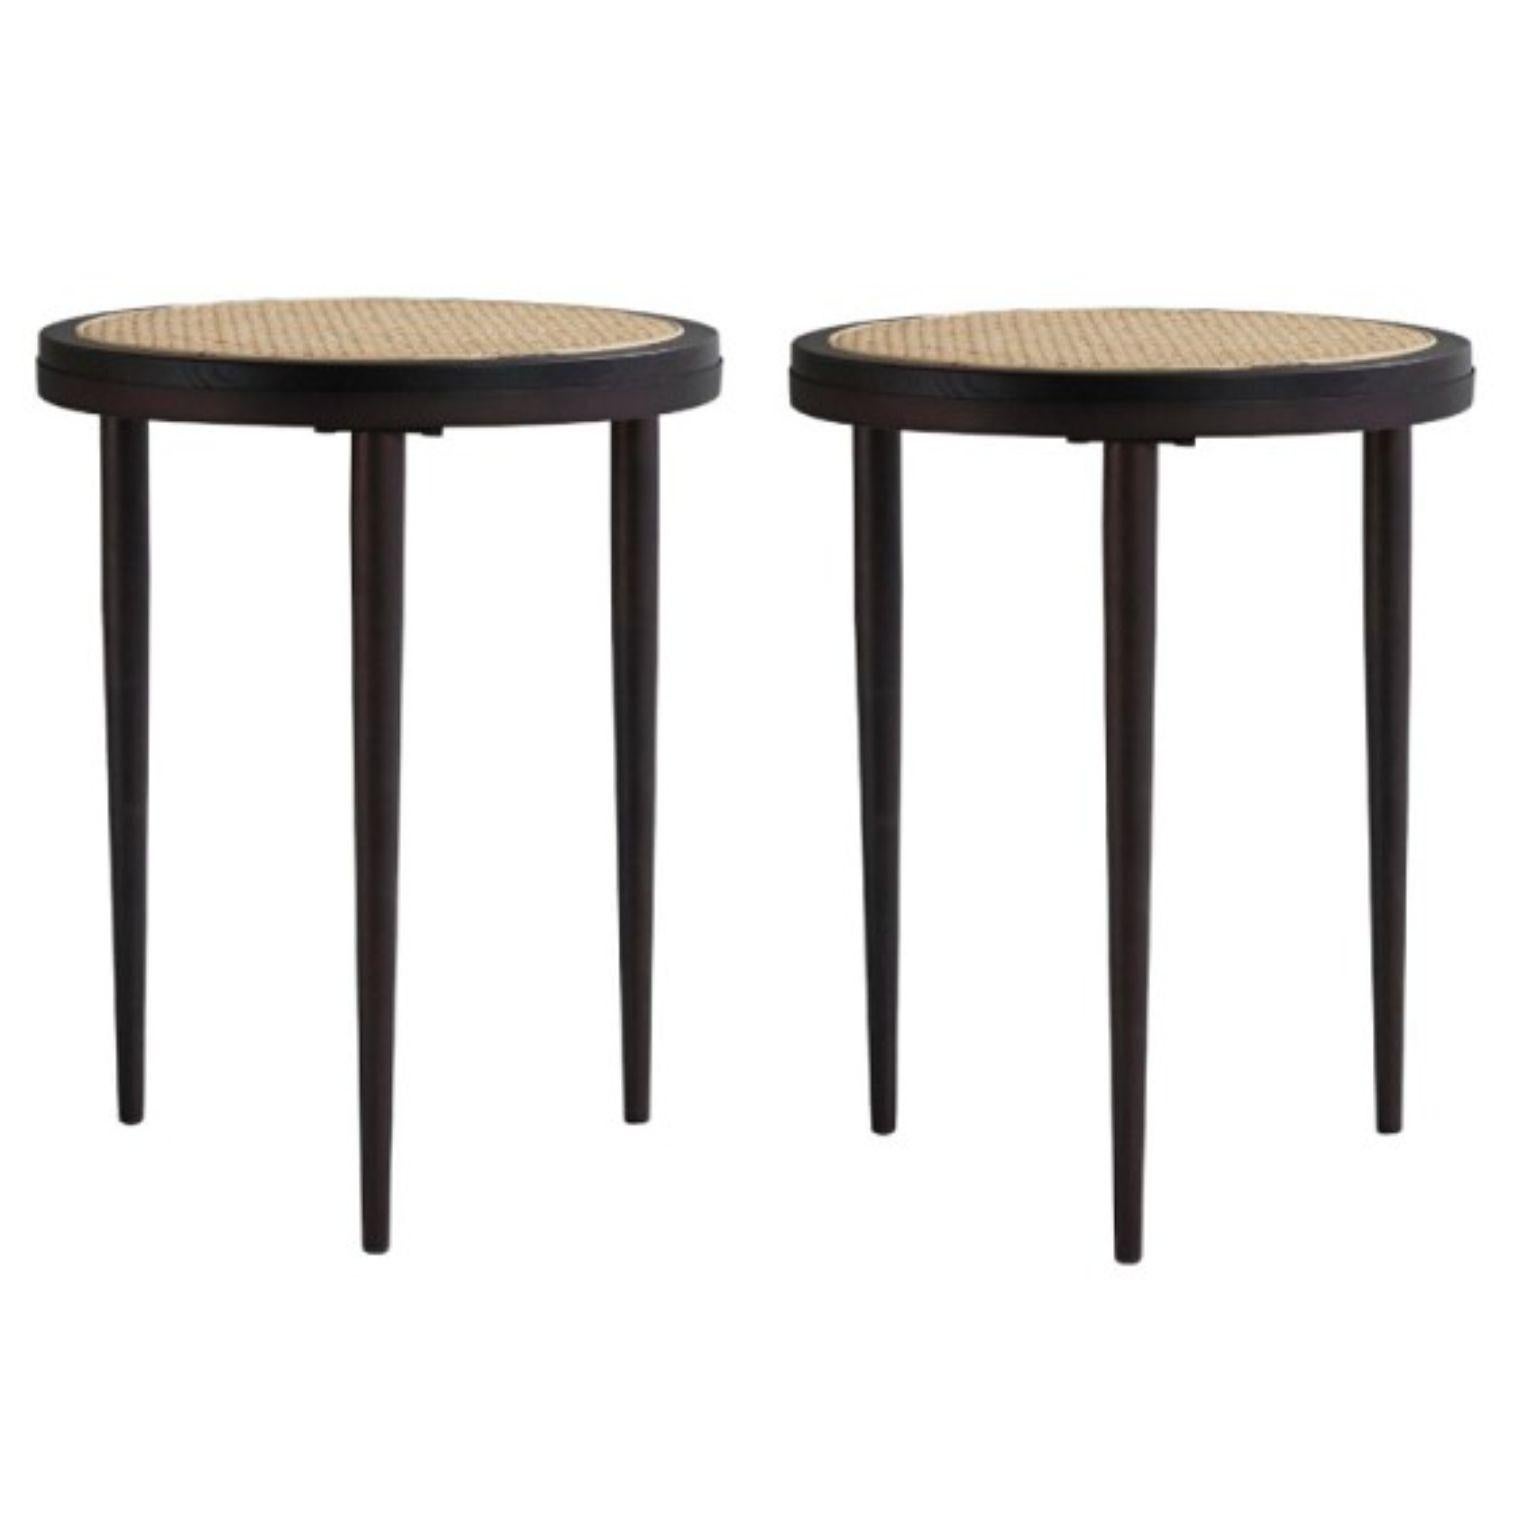 Set of 2 Hako coffee tables tall by 101 Copenhagen
Designed by Kristian Sofus Hansen & Tommy Hyldahl
Dimensions: L 40 / W 40 /H 50 CM
Materials: Metal, ash, French bamboo mesh

Hako, the Japanese word for box or storage, is a collection of